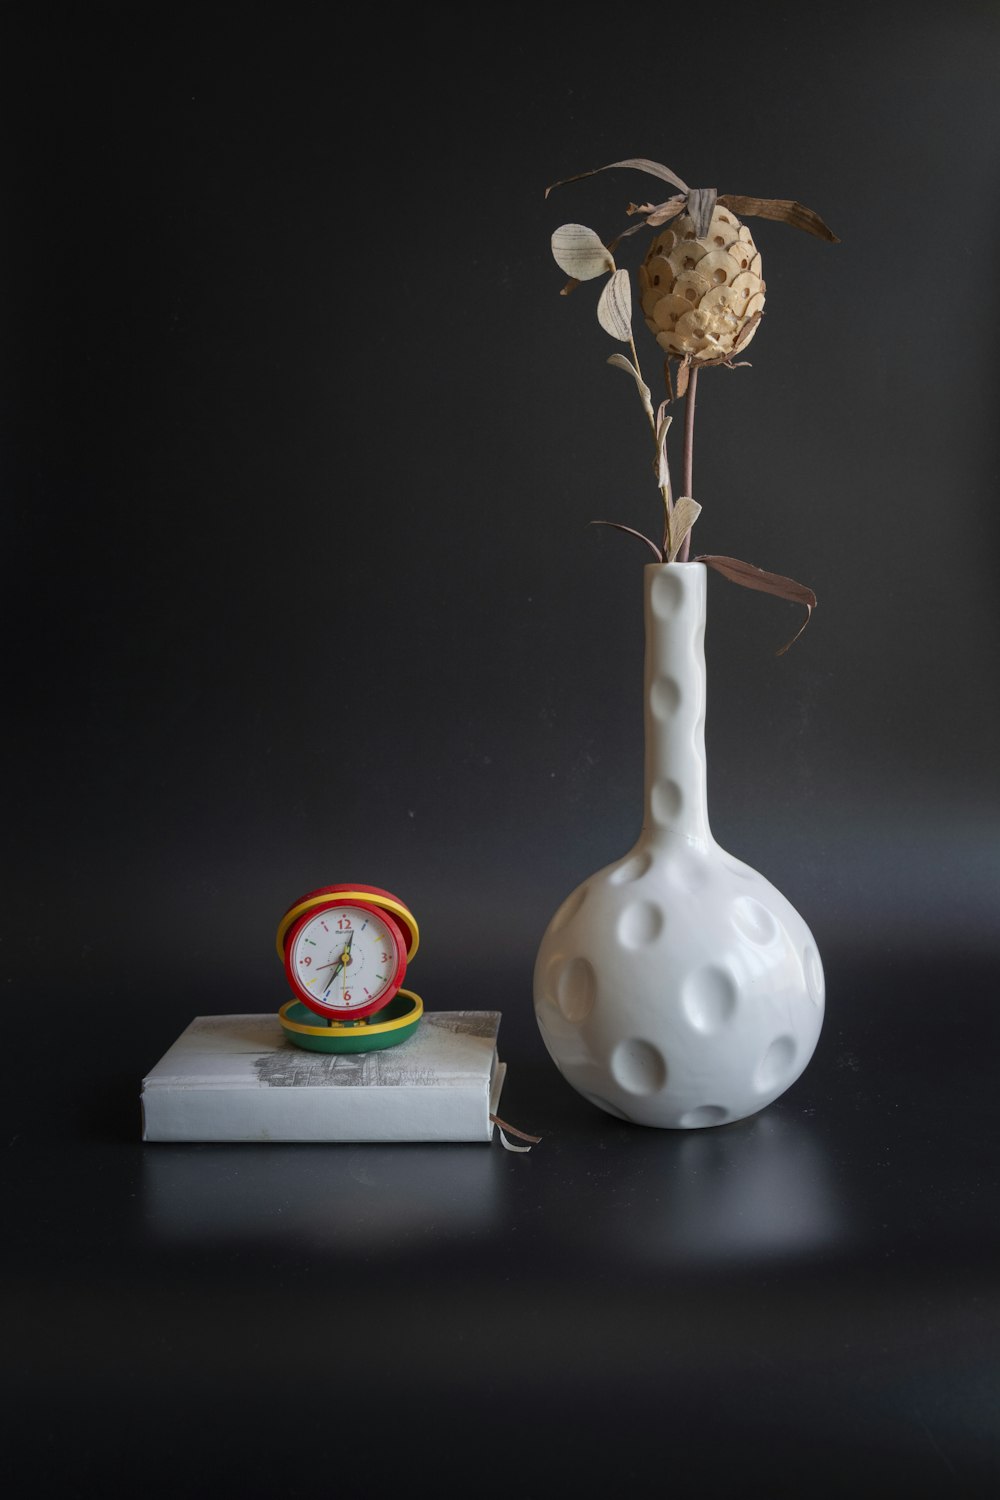 a clock and a vase with flowers